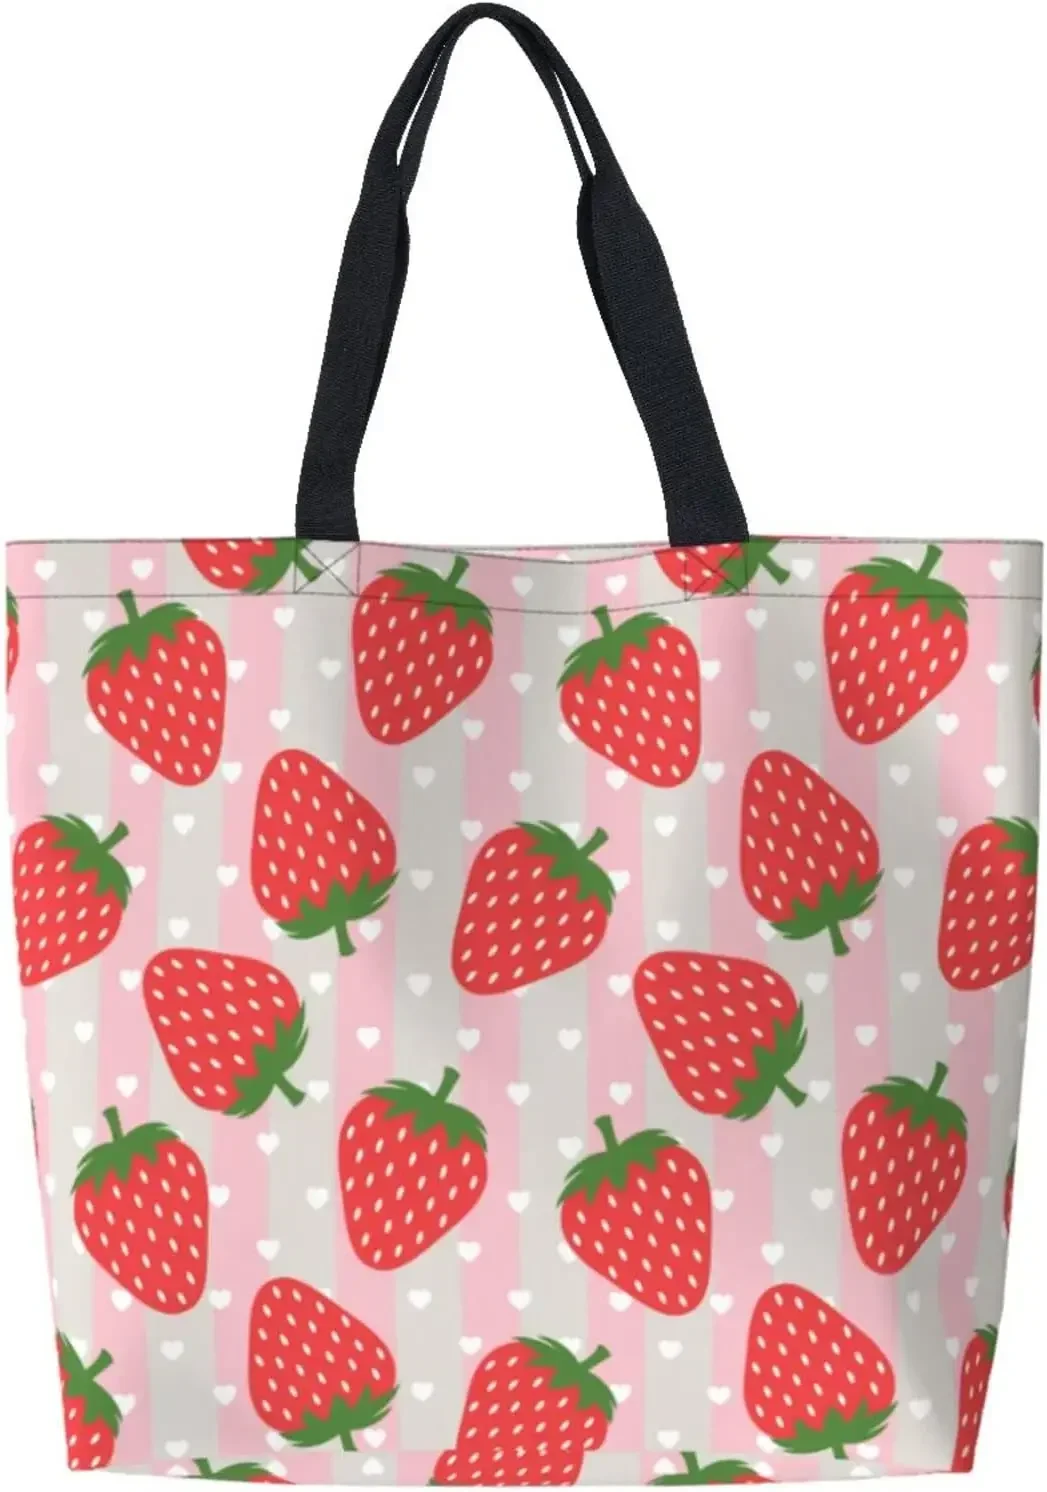 

Strawberry Reusable Grocery Bags - Tote Bag for Women Casual Shoulder Bag Foldable Large Shopping Bag